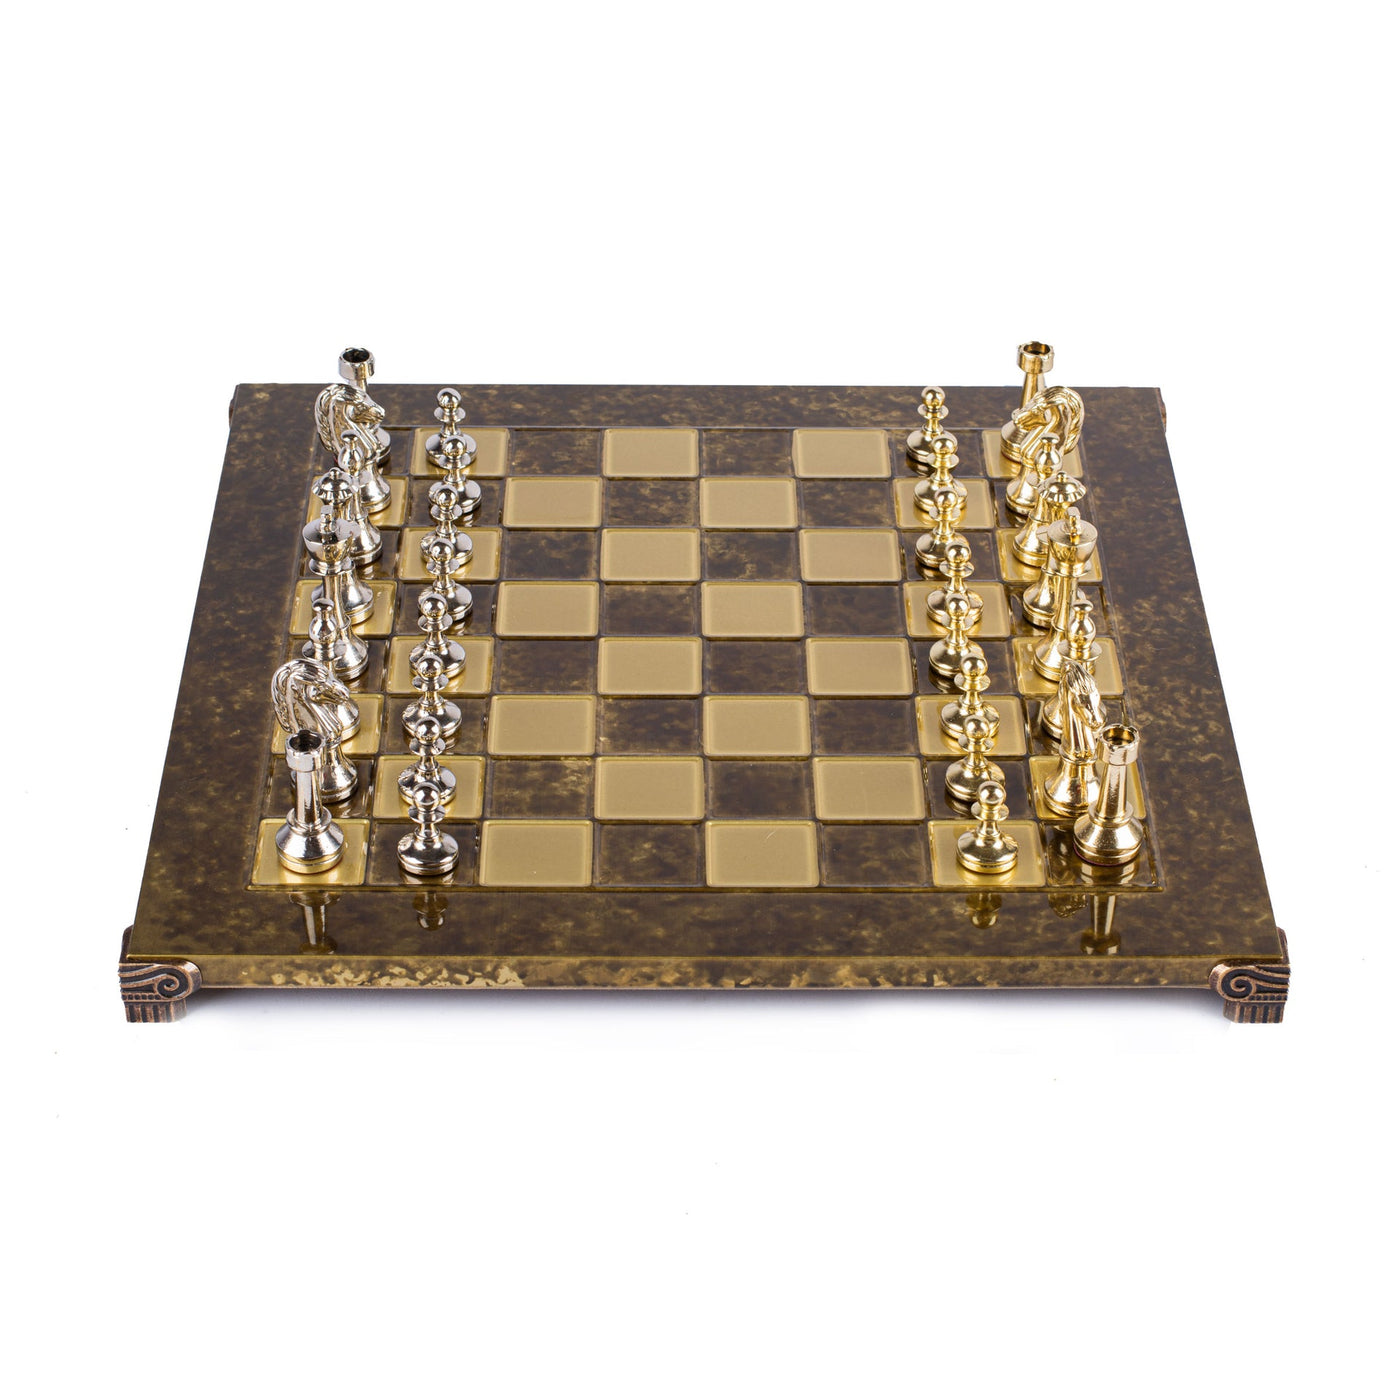 Classic Metal Staunton Chess set with Gold and Silver Chessmen and 36cm Chessboard in Brown